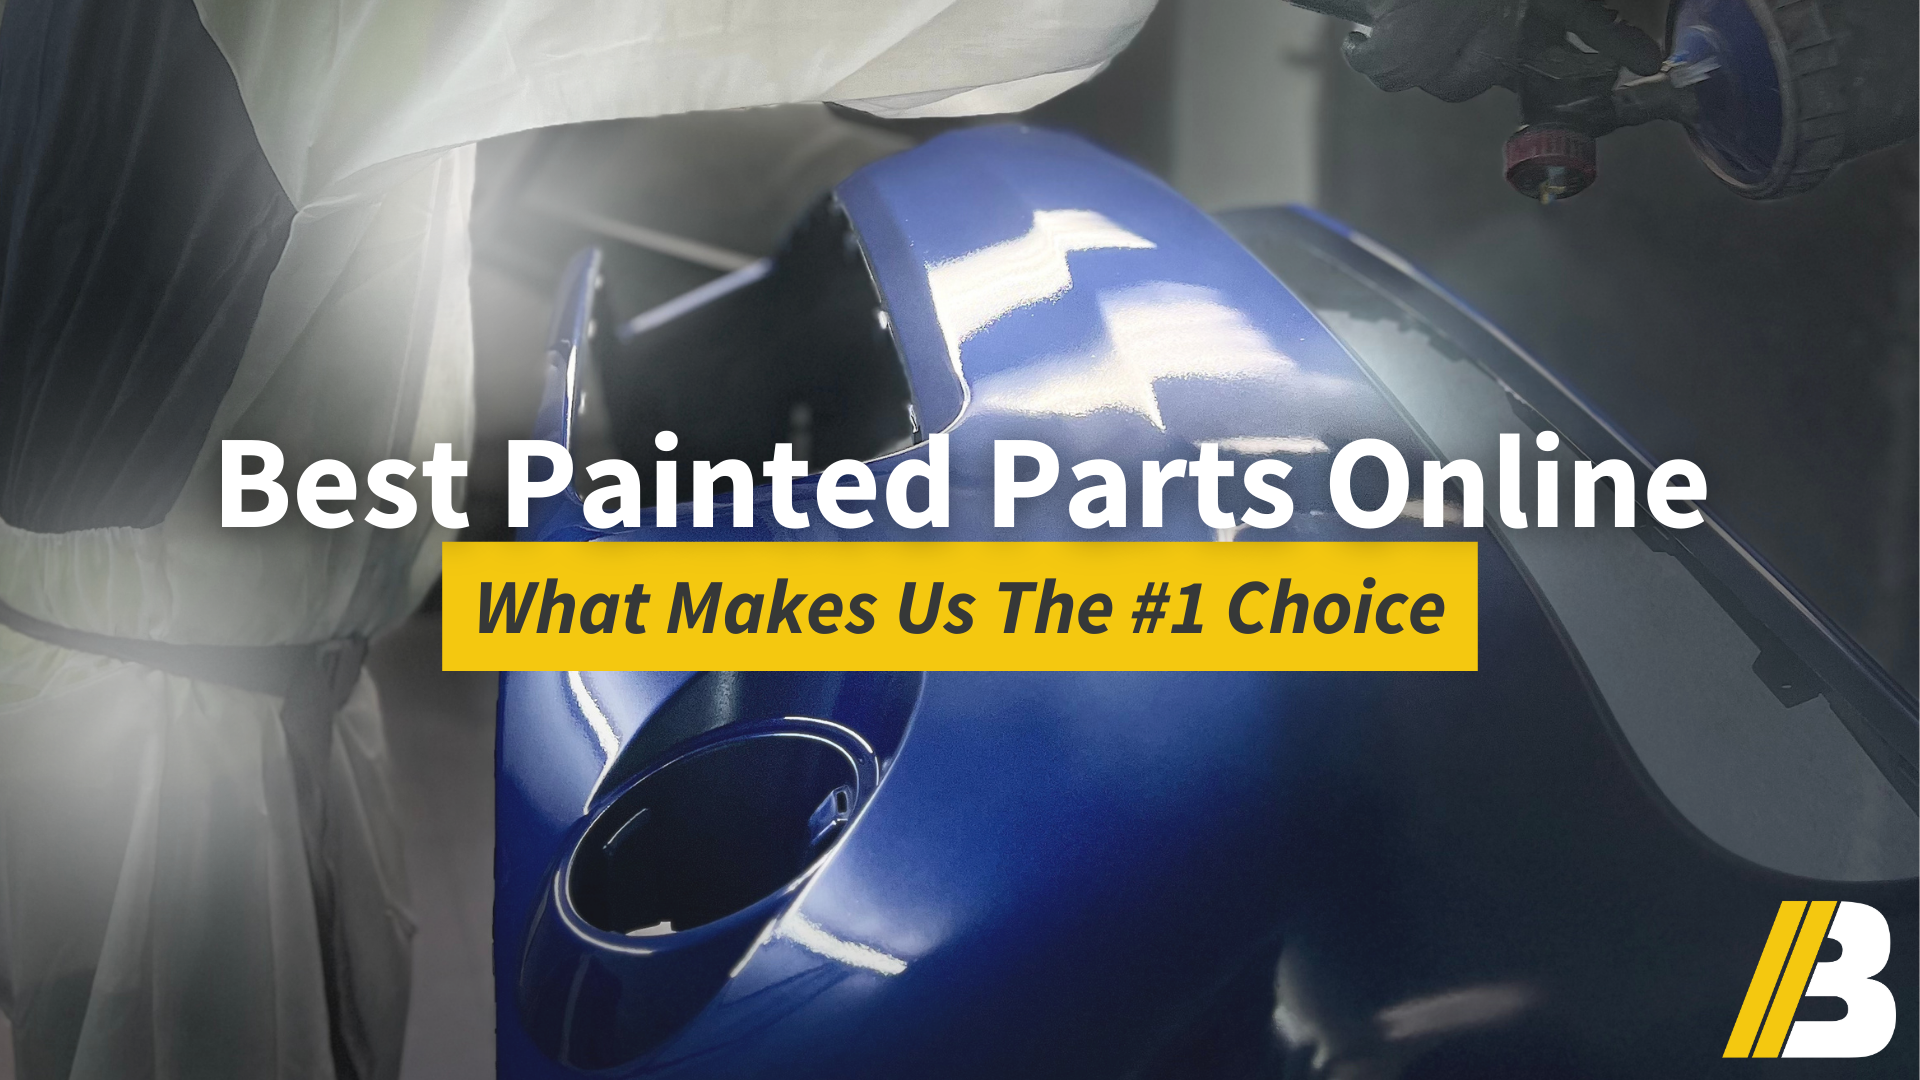 How Do Our Painted Parts Compare to Other Online Sellers? 